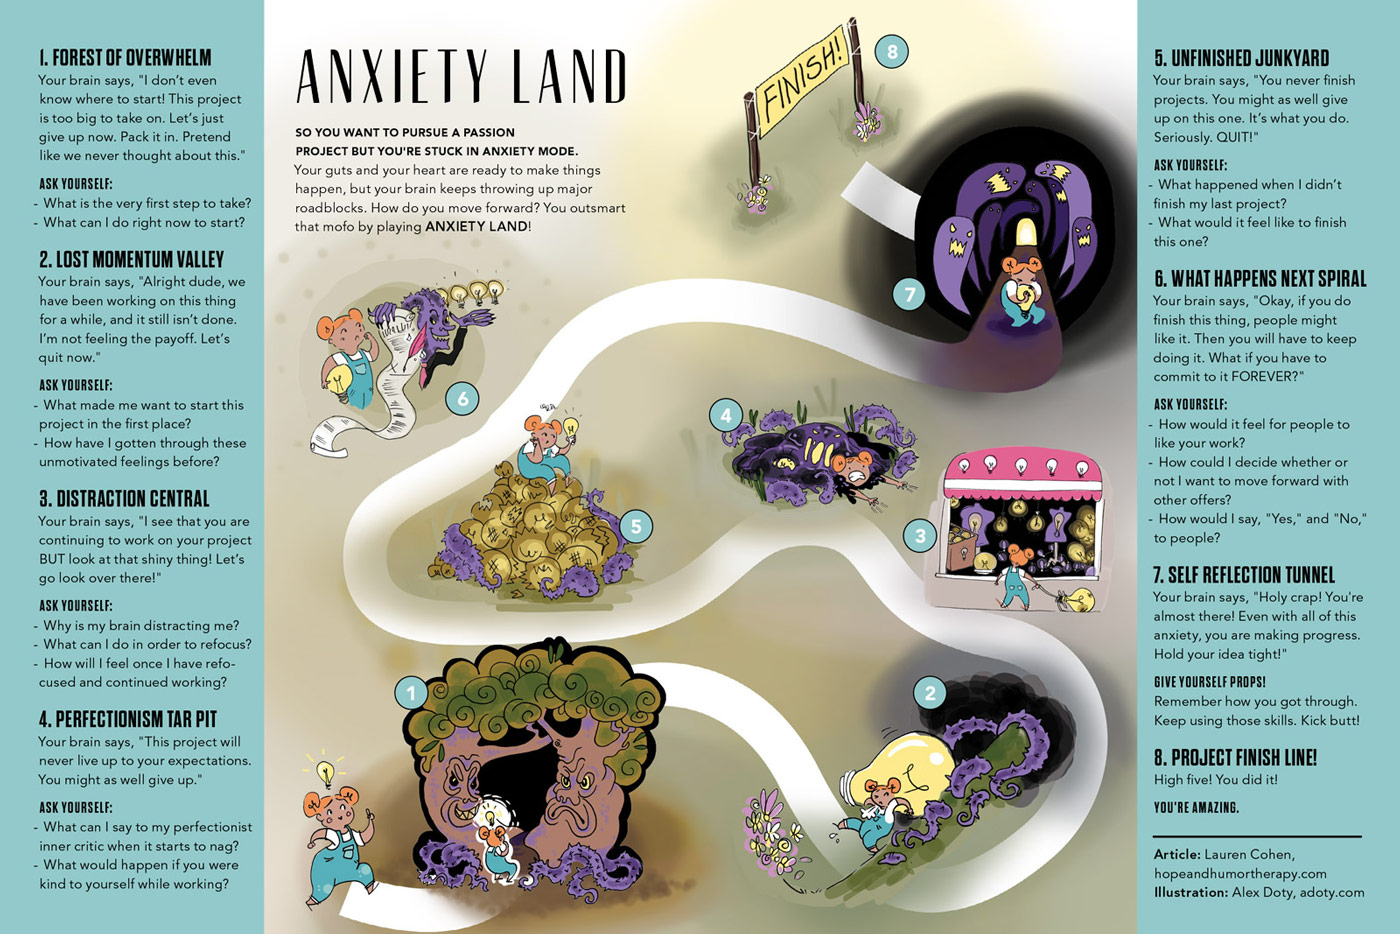 Anxiety Land by Lauren Cohen, Illustrated by Alex Doty